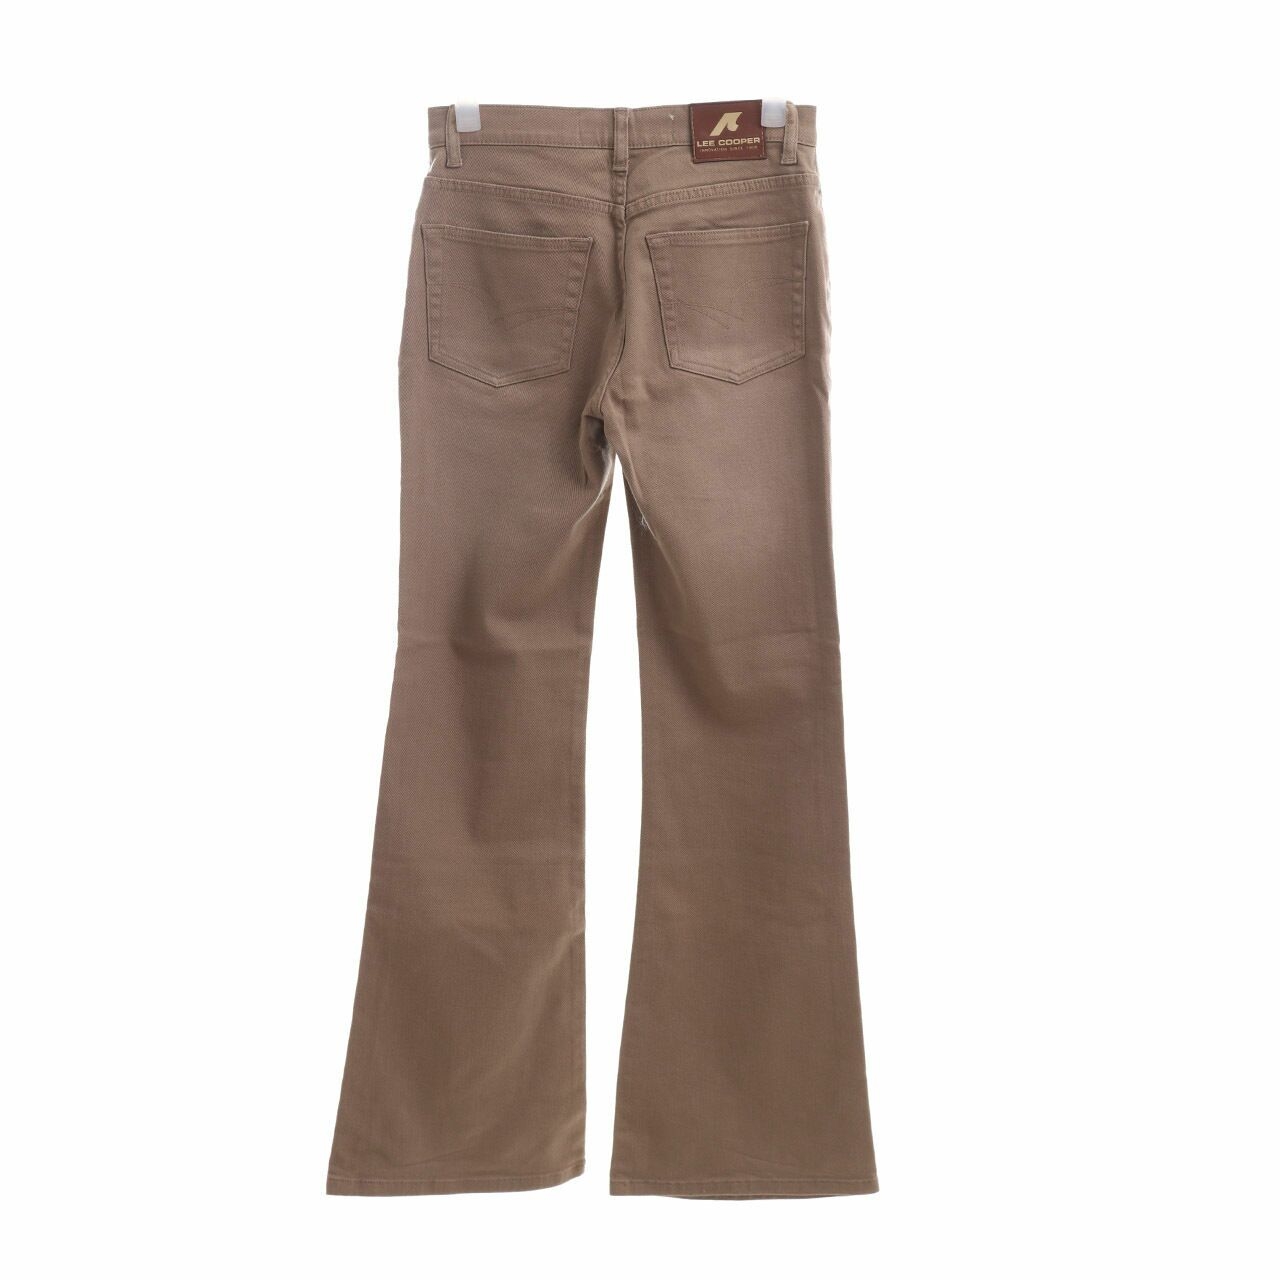 Lee Cooper Taupe Long Pants